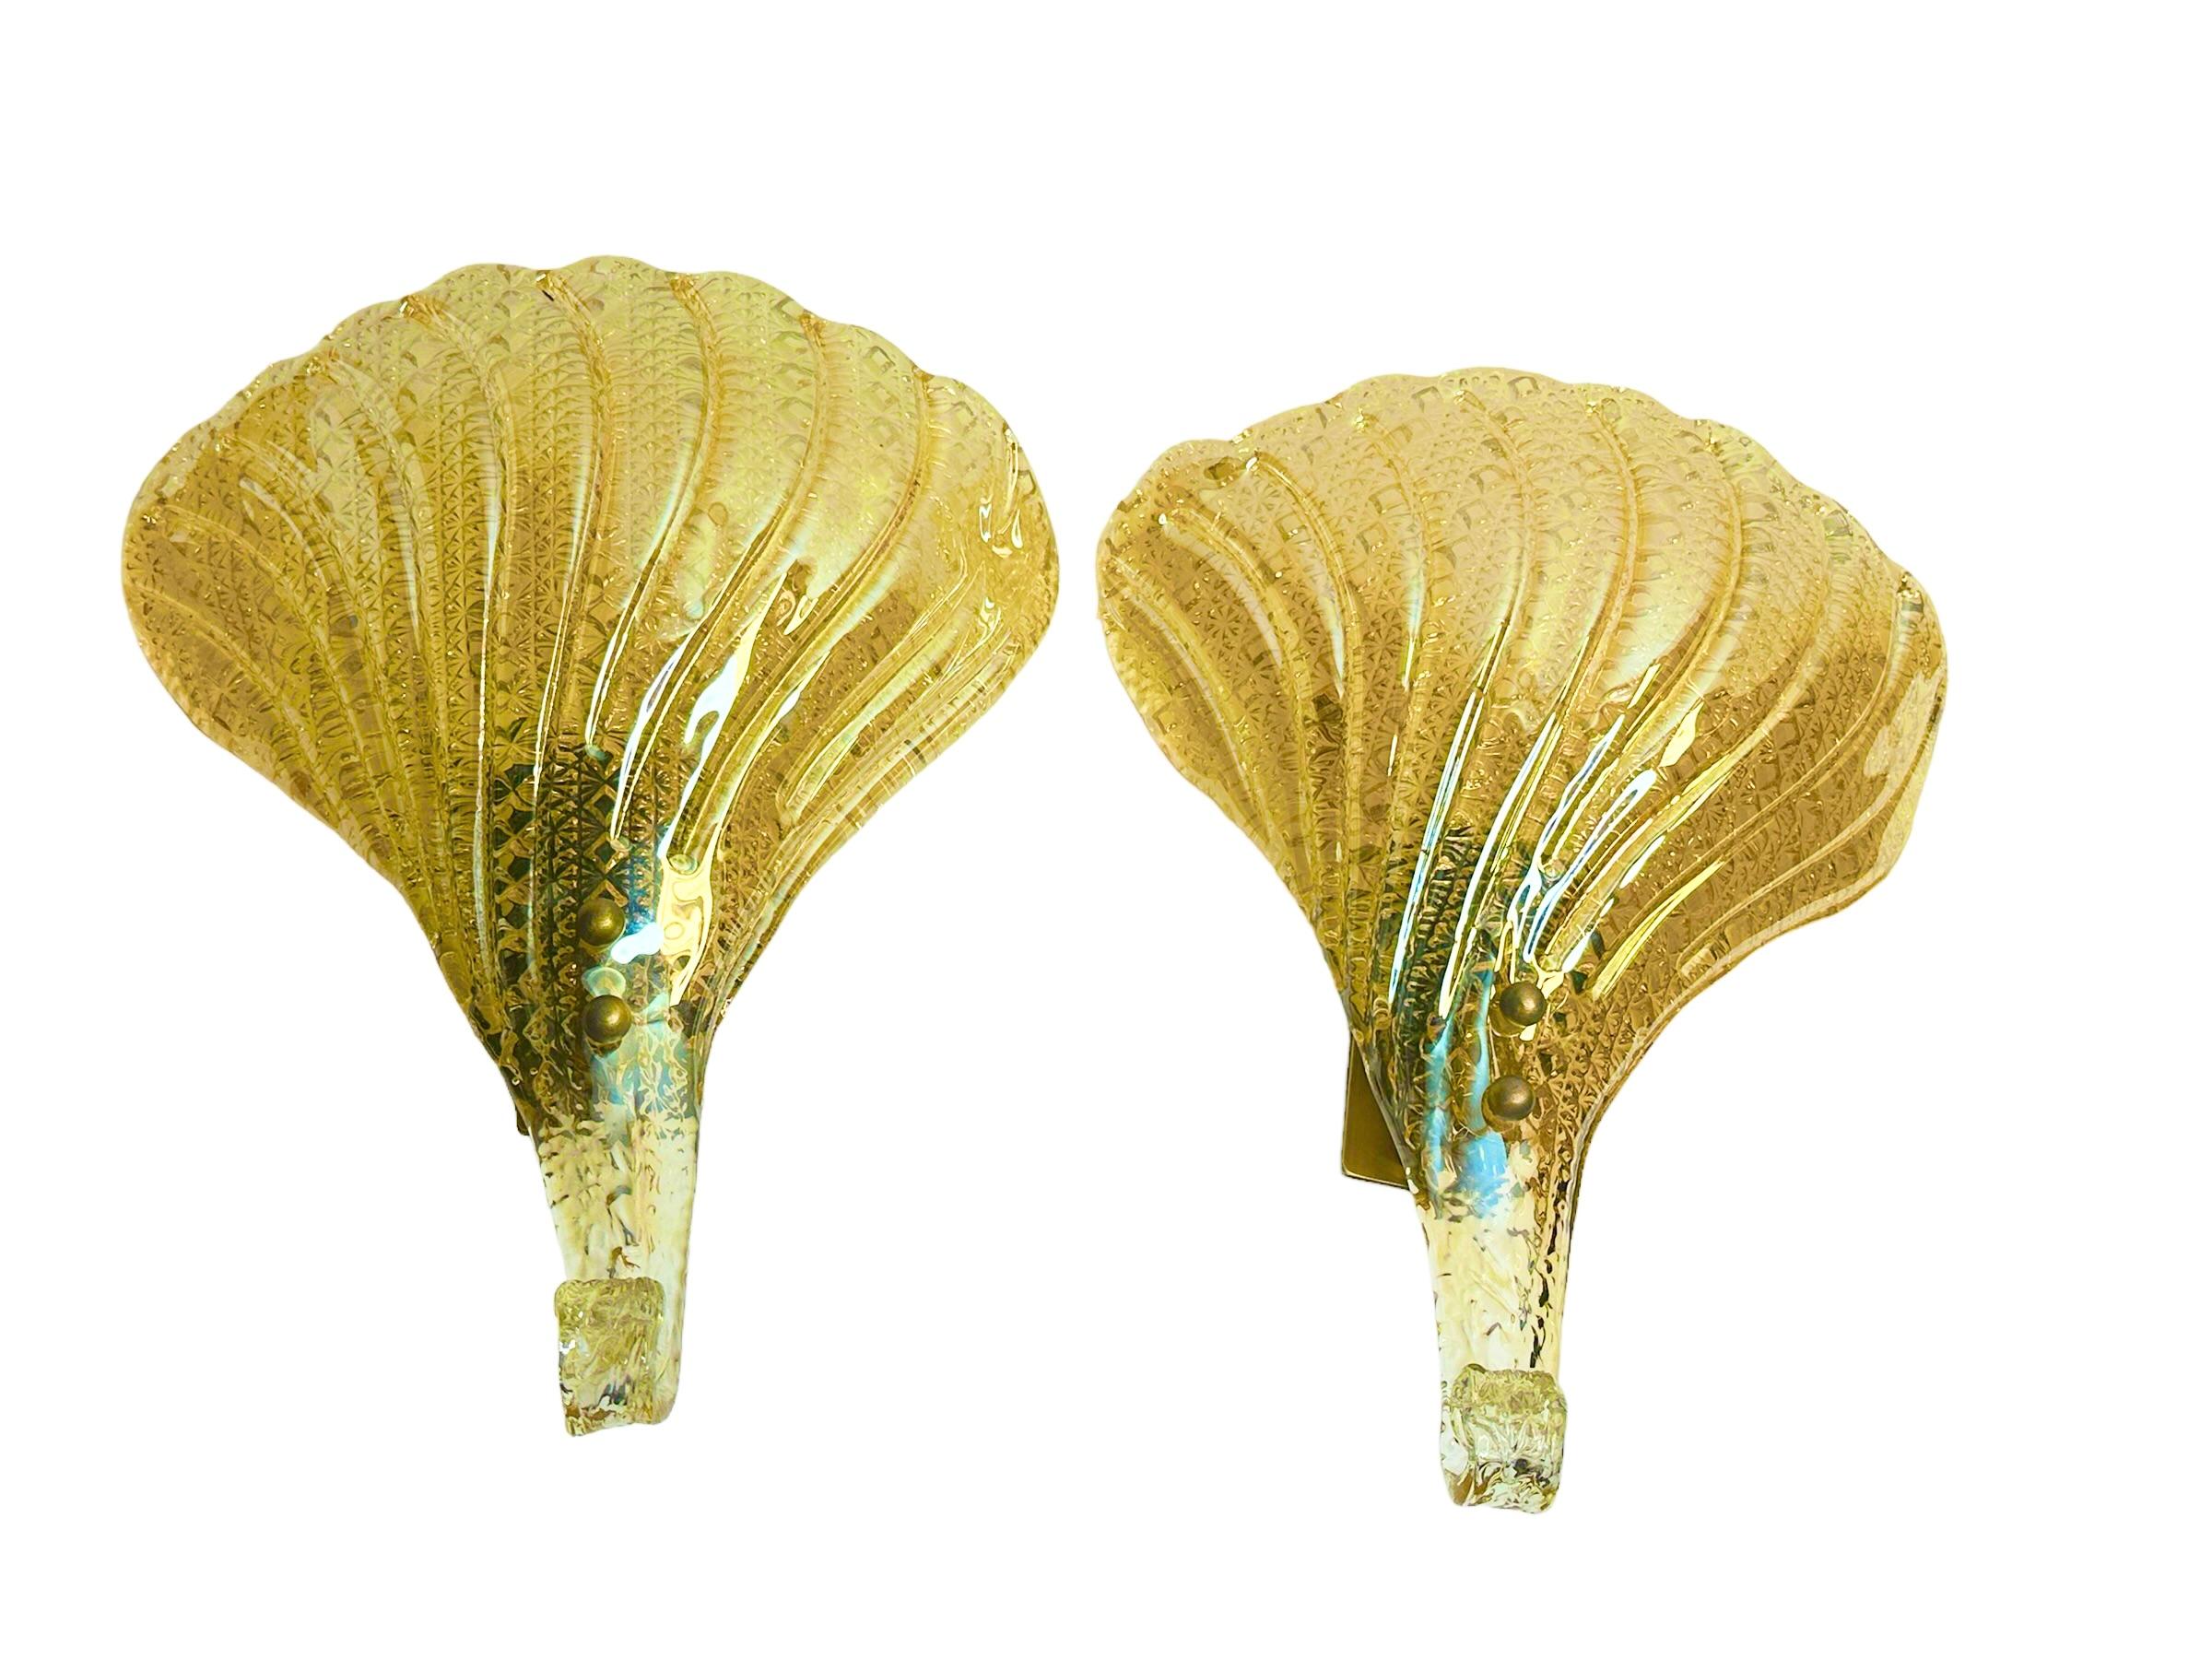 Incredible pair of mid century Murano glass leaf wall sconce with heavy brass fixture. This wonderful piece was designed in Italy by Barovier & Toso during the 1960s.
Each sconce is outstanding as the way the leaf is designed in detail on the edges